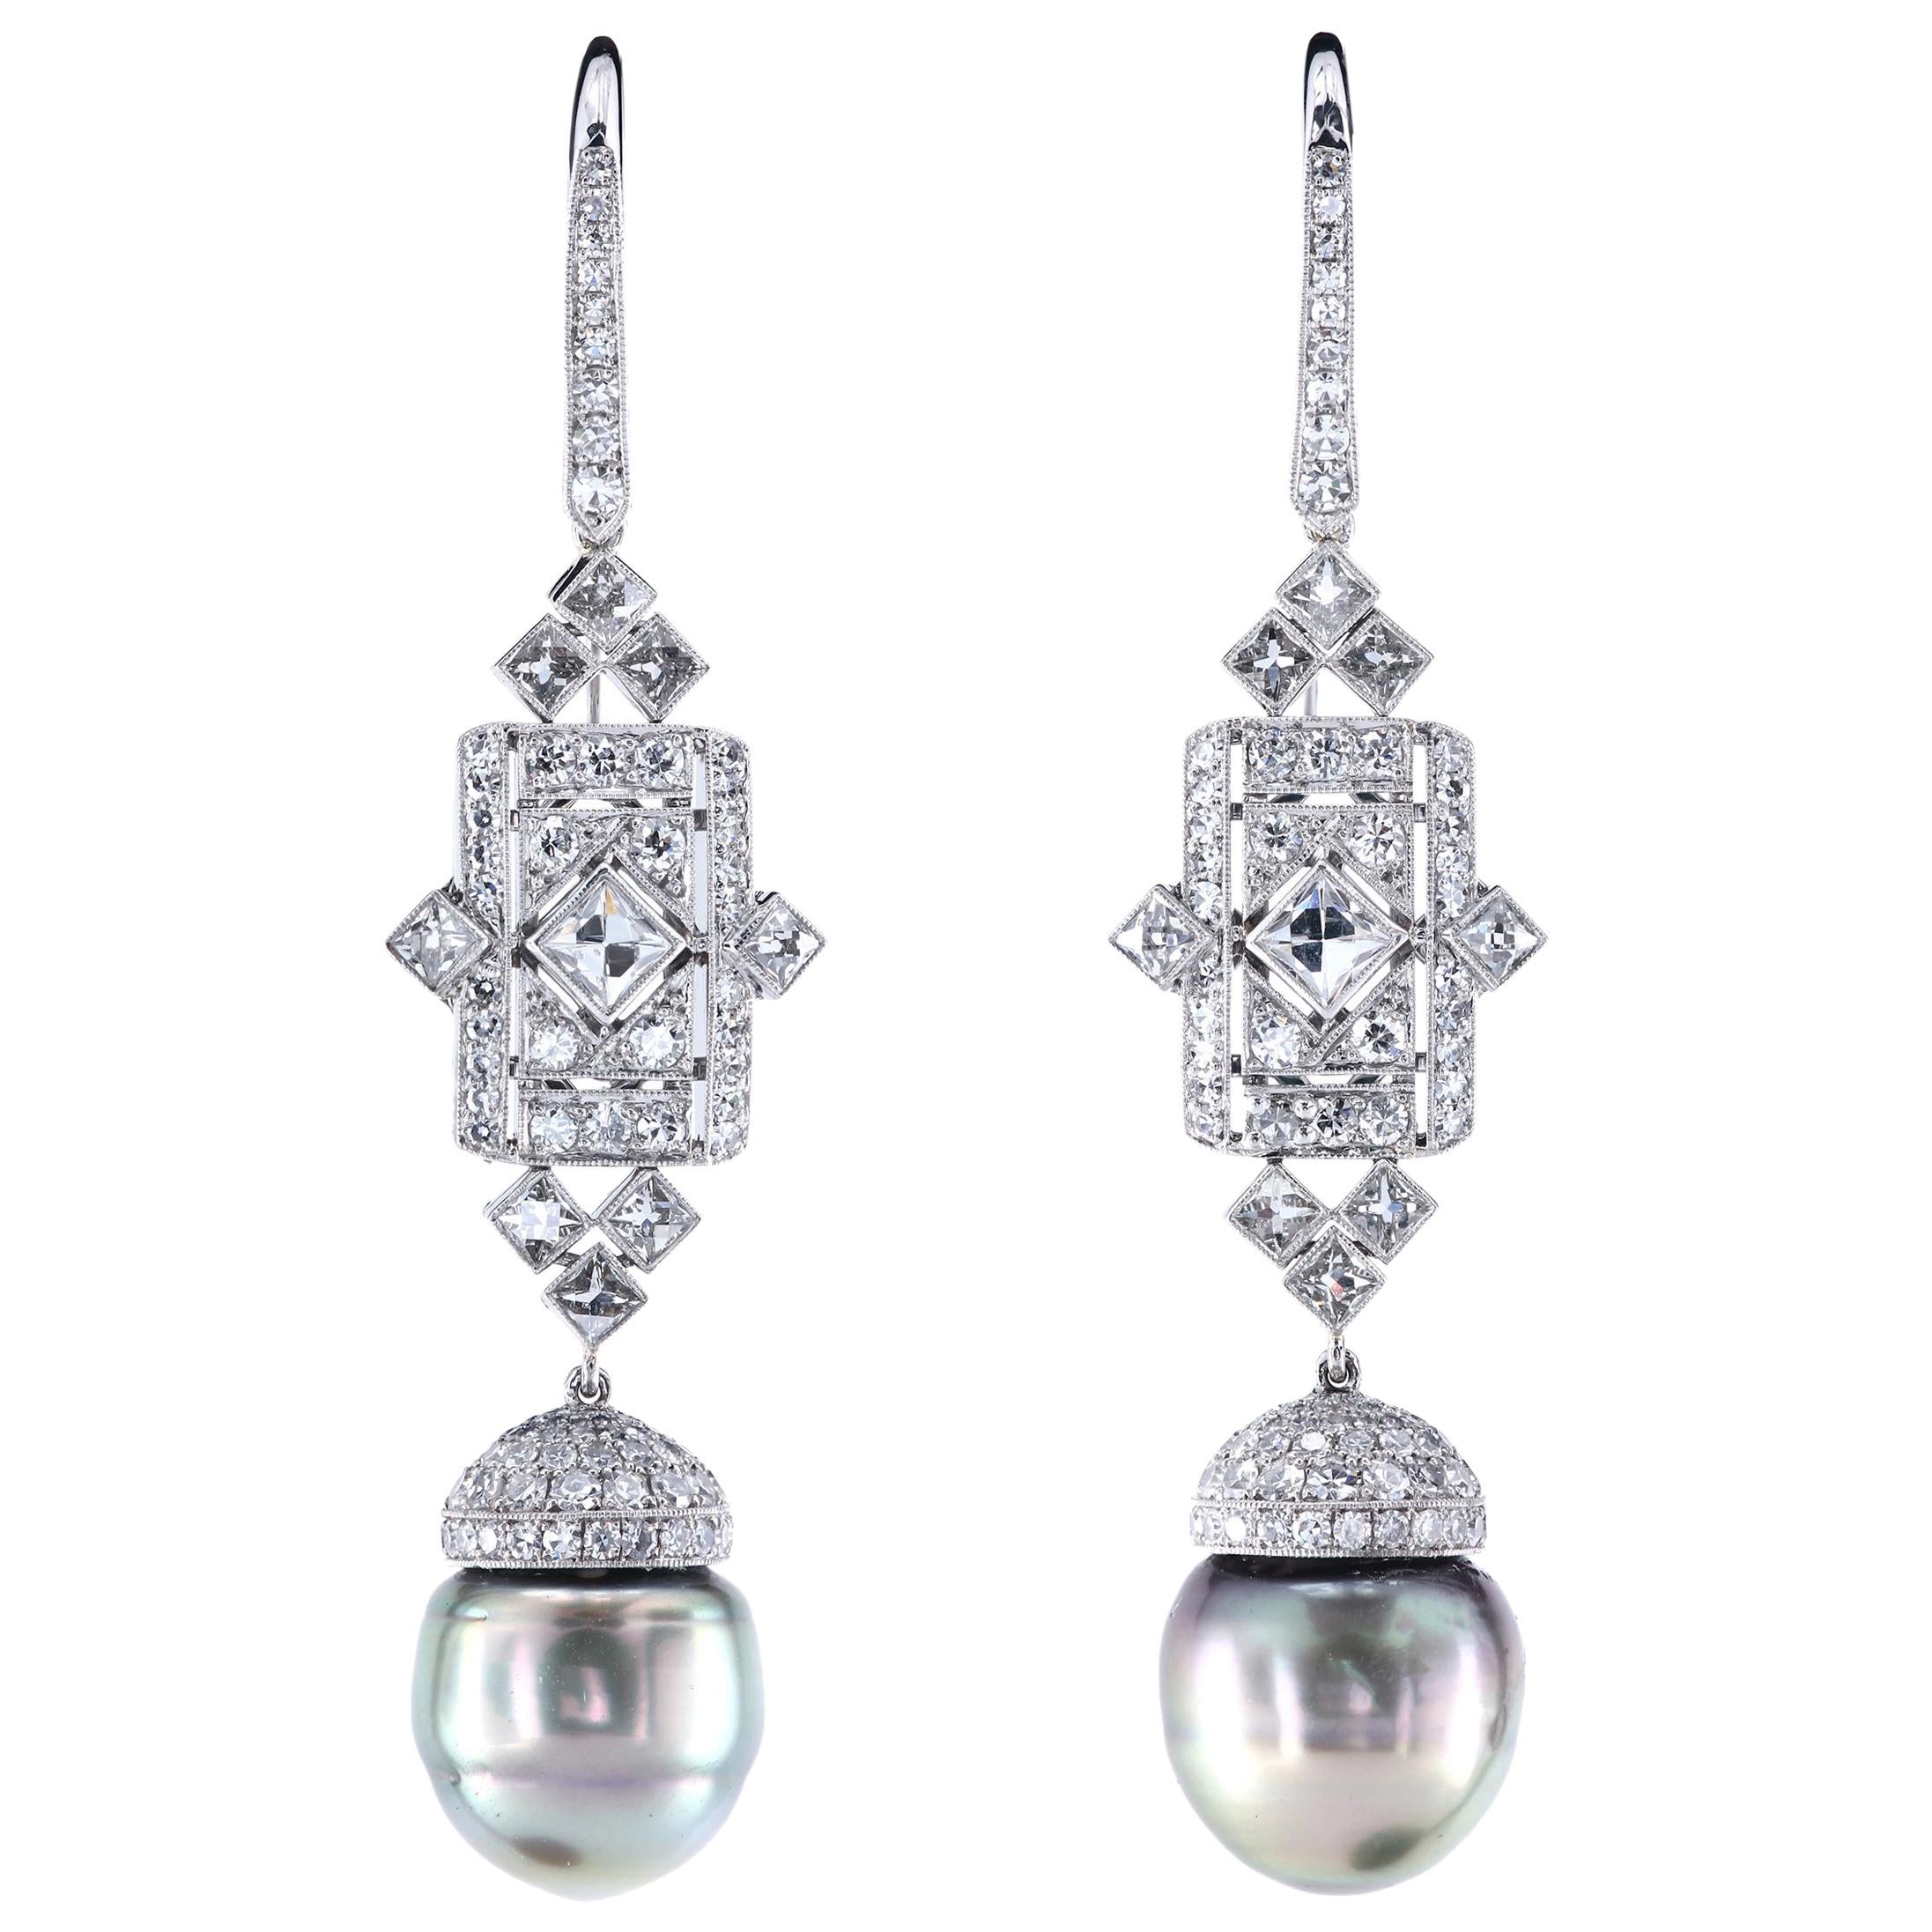 Art Deco Style Earrings with Pearls, Round and French Cut Diamonds In Platinum